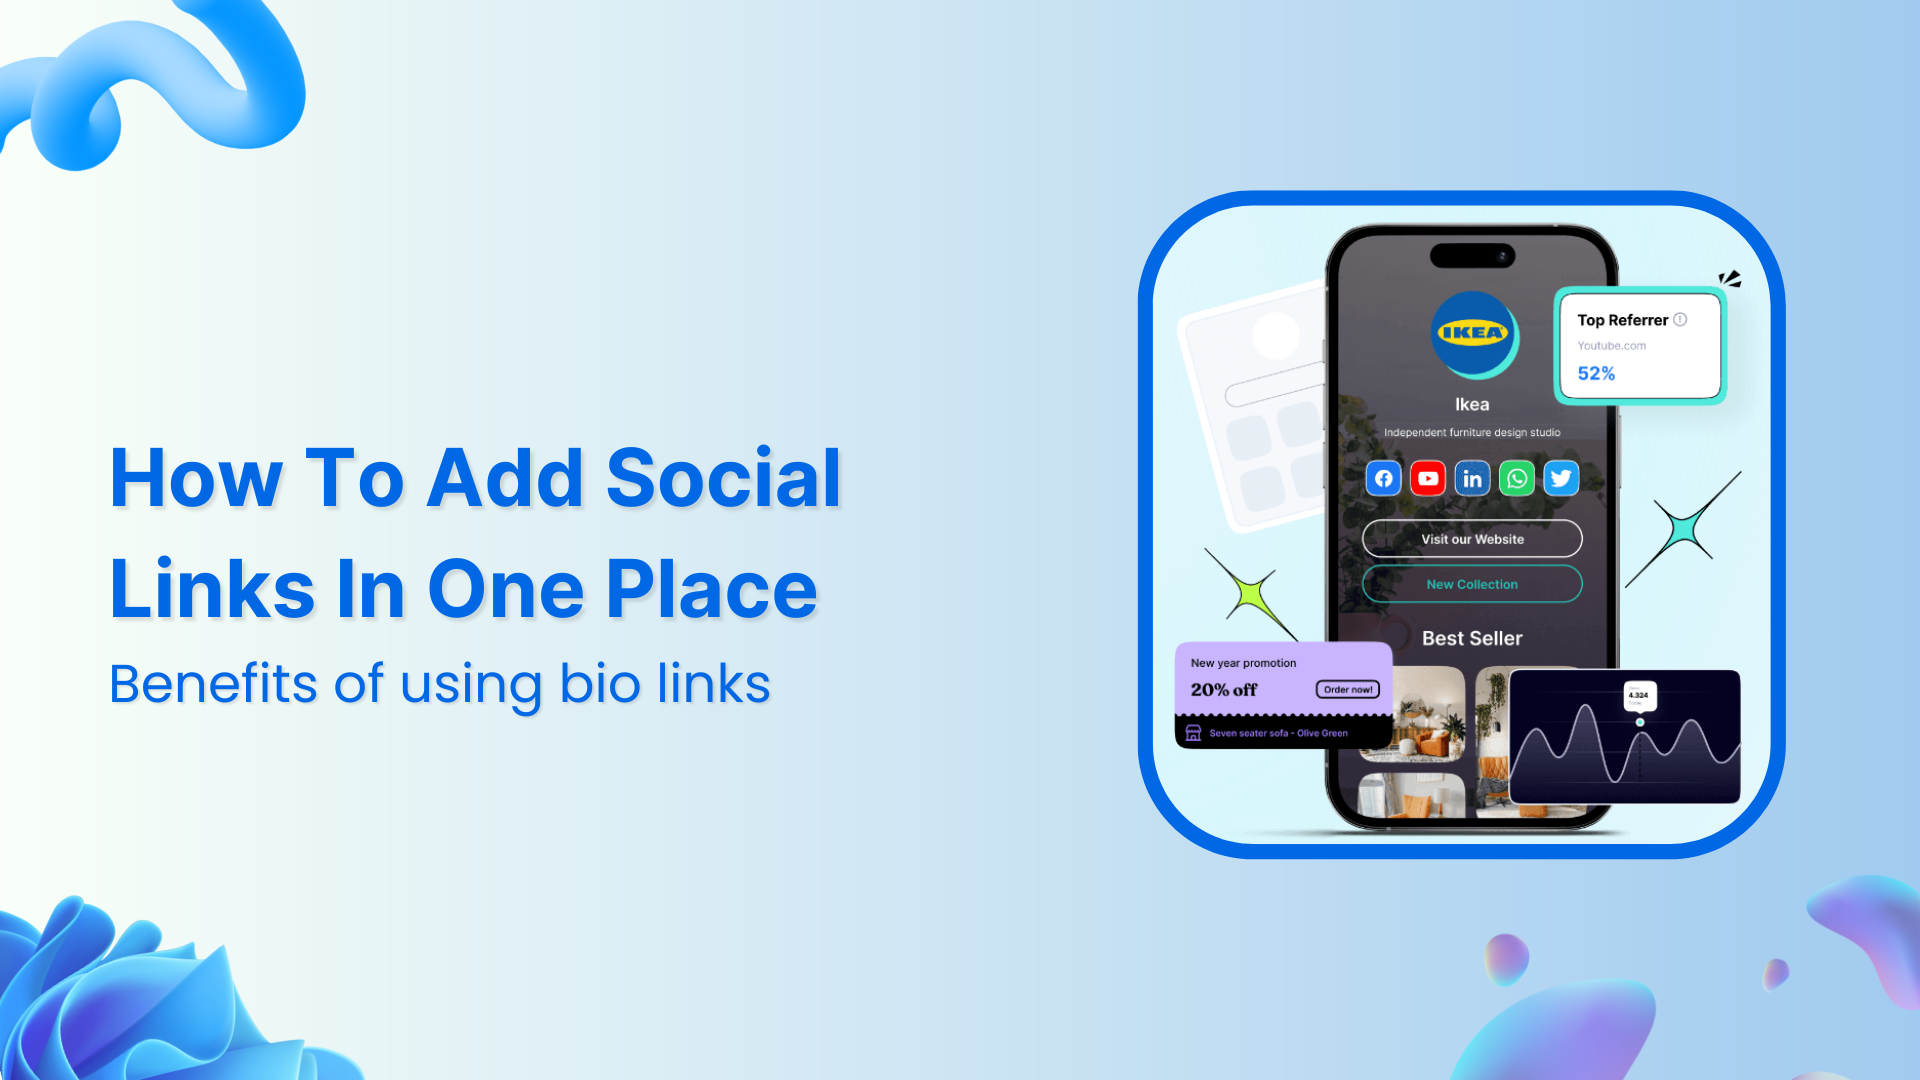 How To Add Social Media Links In One Place?